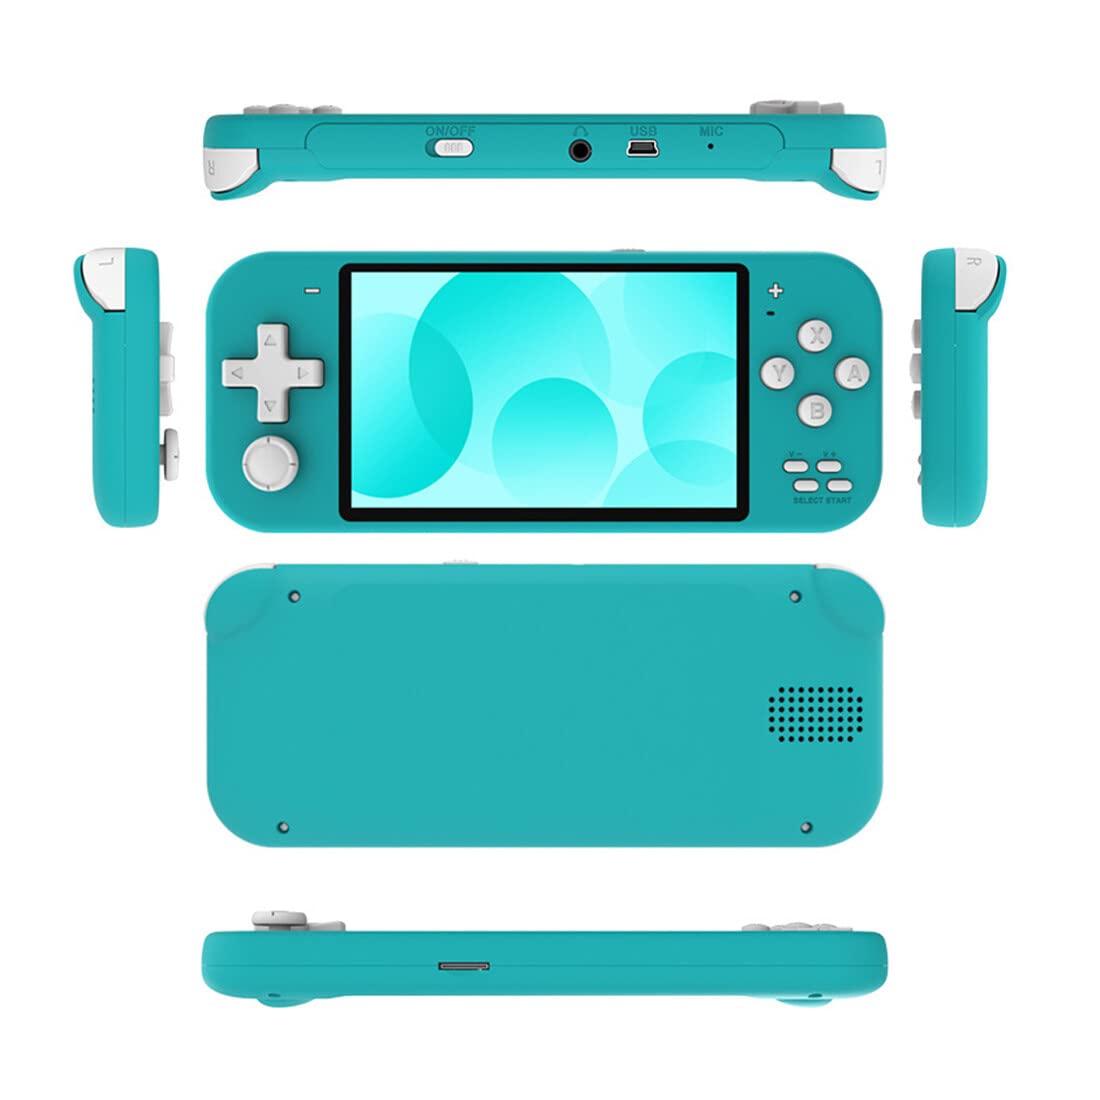 Newcomer Powkiddy X20MINI Handheld Game Console, Retro Video Games Consoles 8G with 2000 Games for Adults Kids